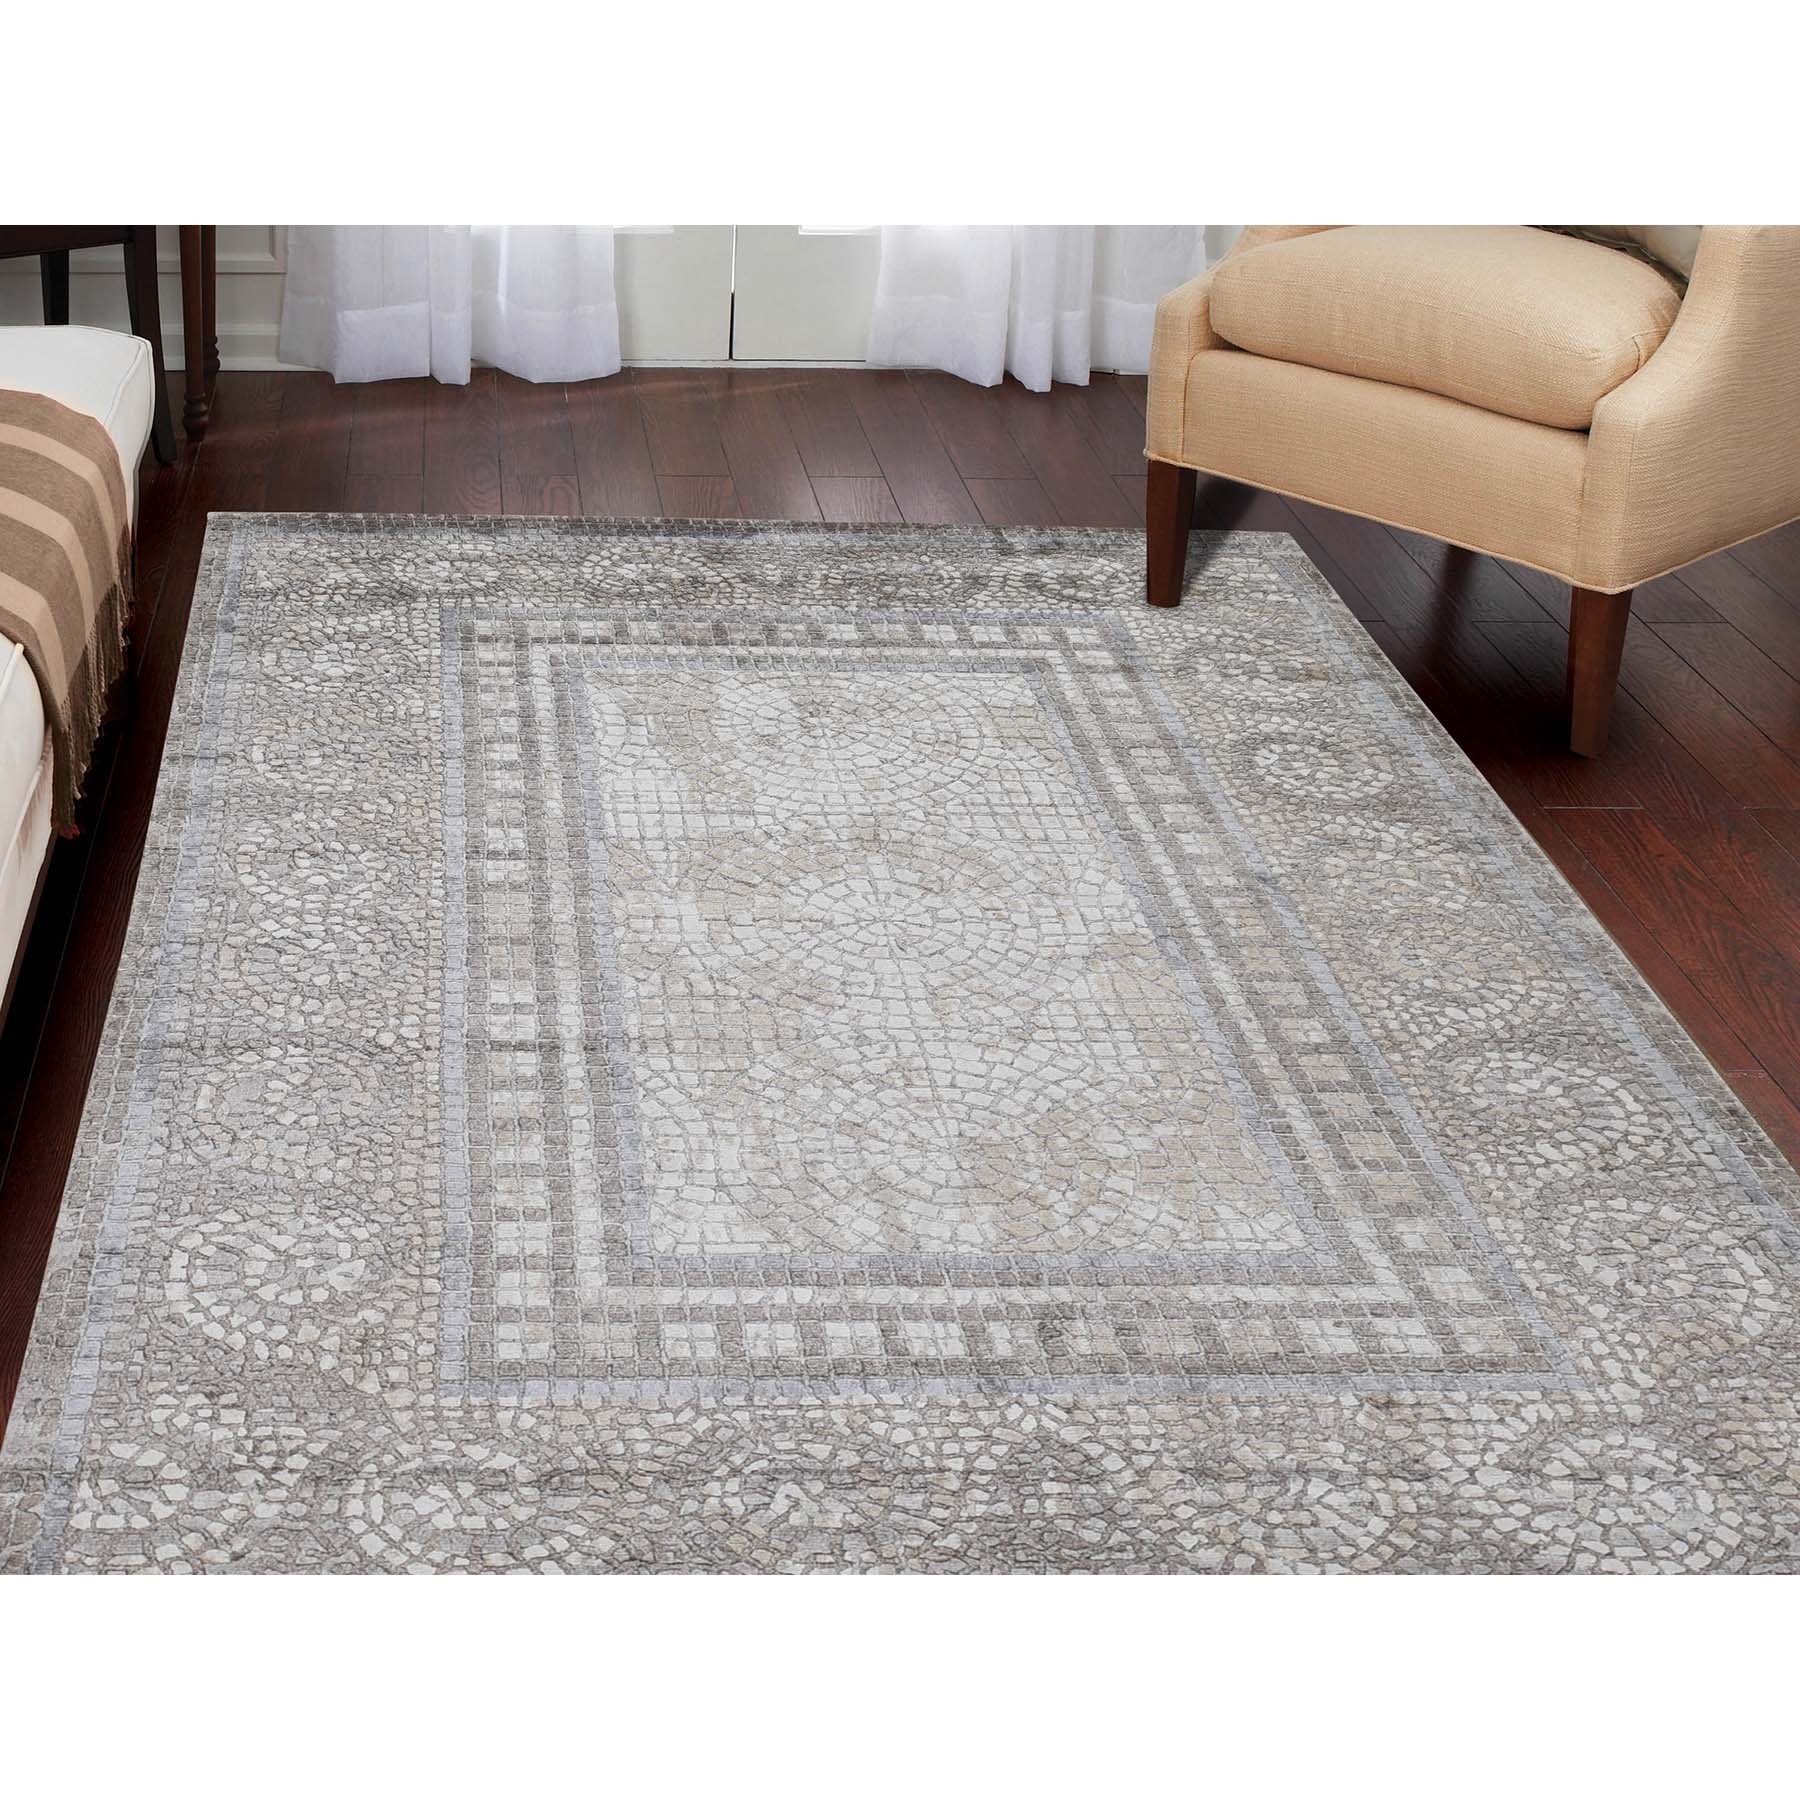 5-2 x6-10  Ivory And Taupe Silken Roman Mosaic Design Hand-Knotted Oriental Rug 